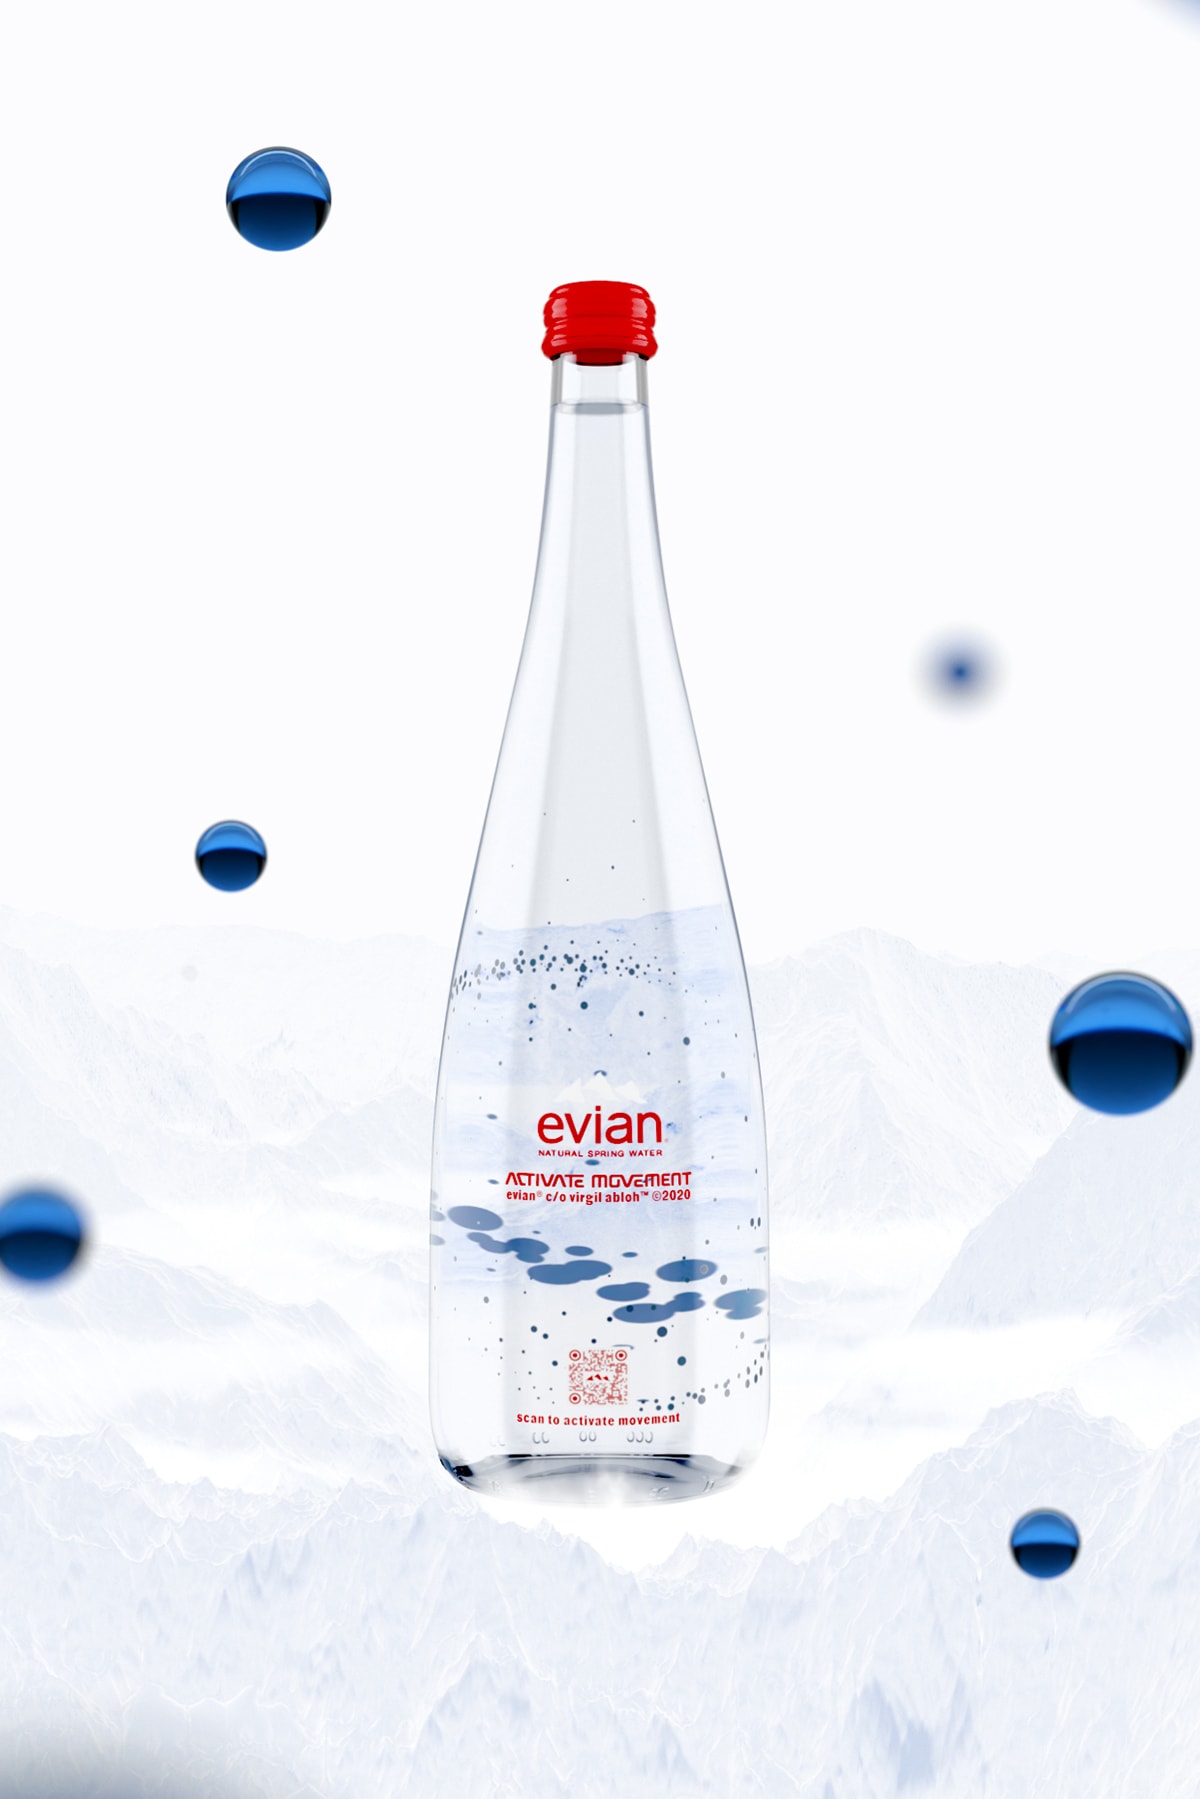 Virgil Abloh x Evian Limited Edition Collection